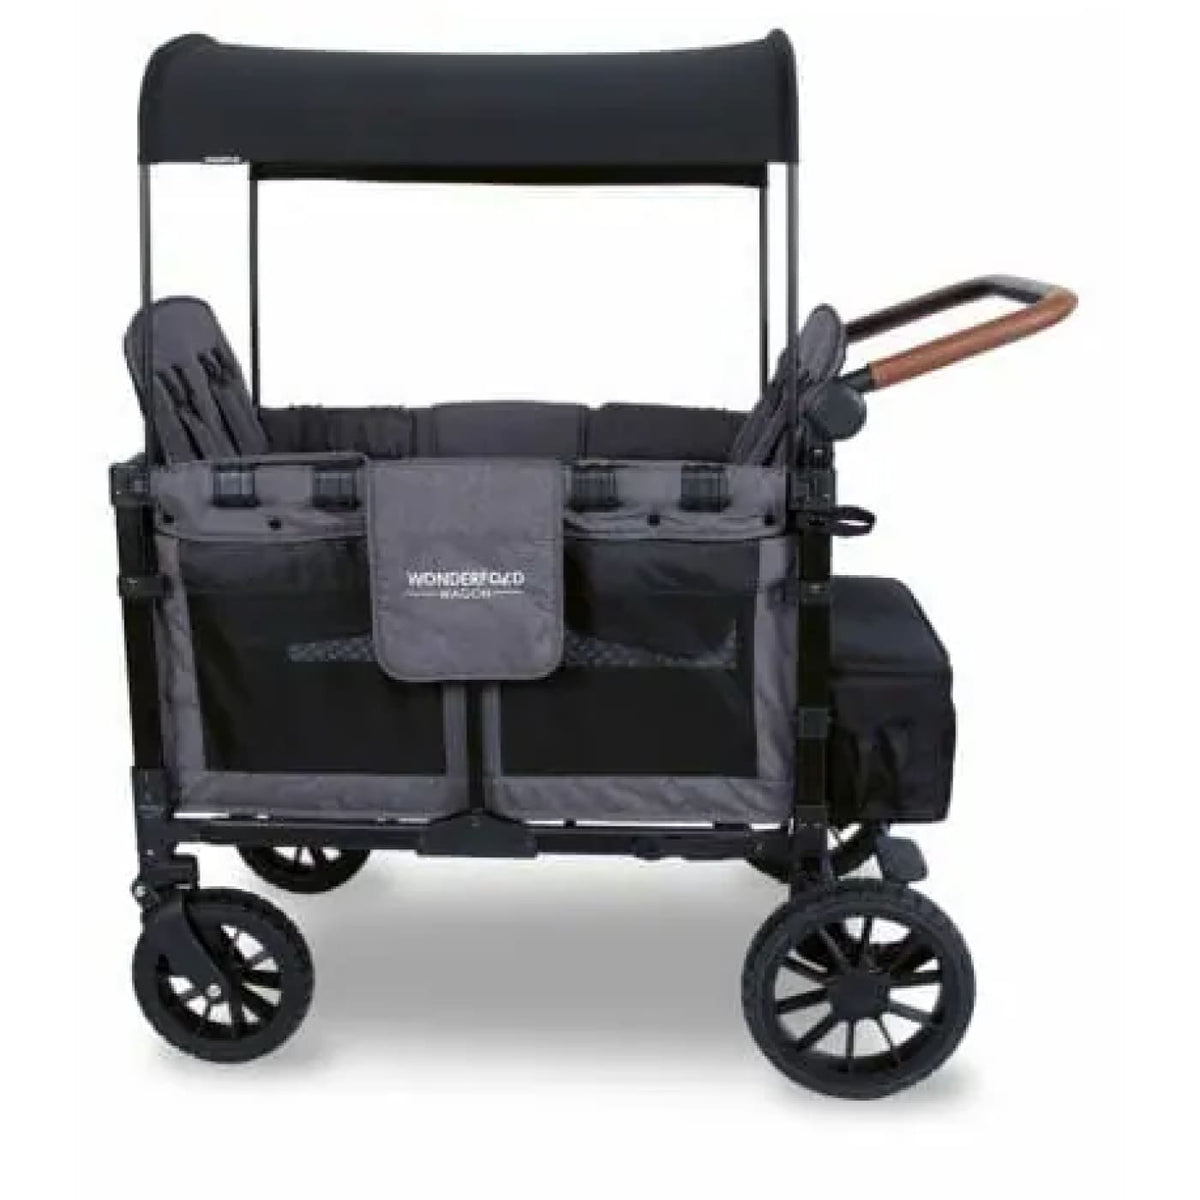 Wonderfold W4 Luxe Quad Wagon - Charcoal Grey with Black Frame - PRAMS &amp; STROLLERS - WAGONS